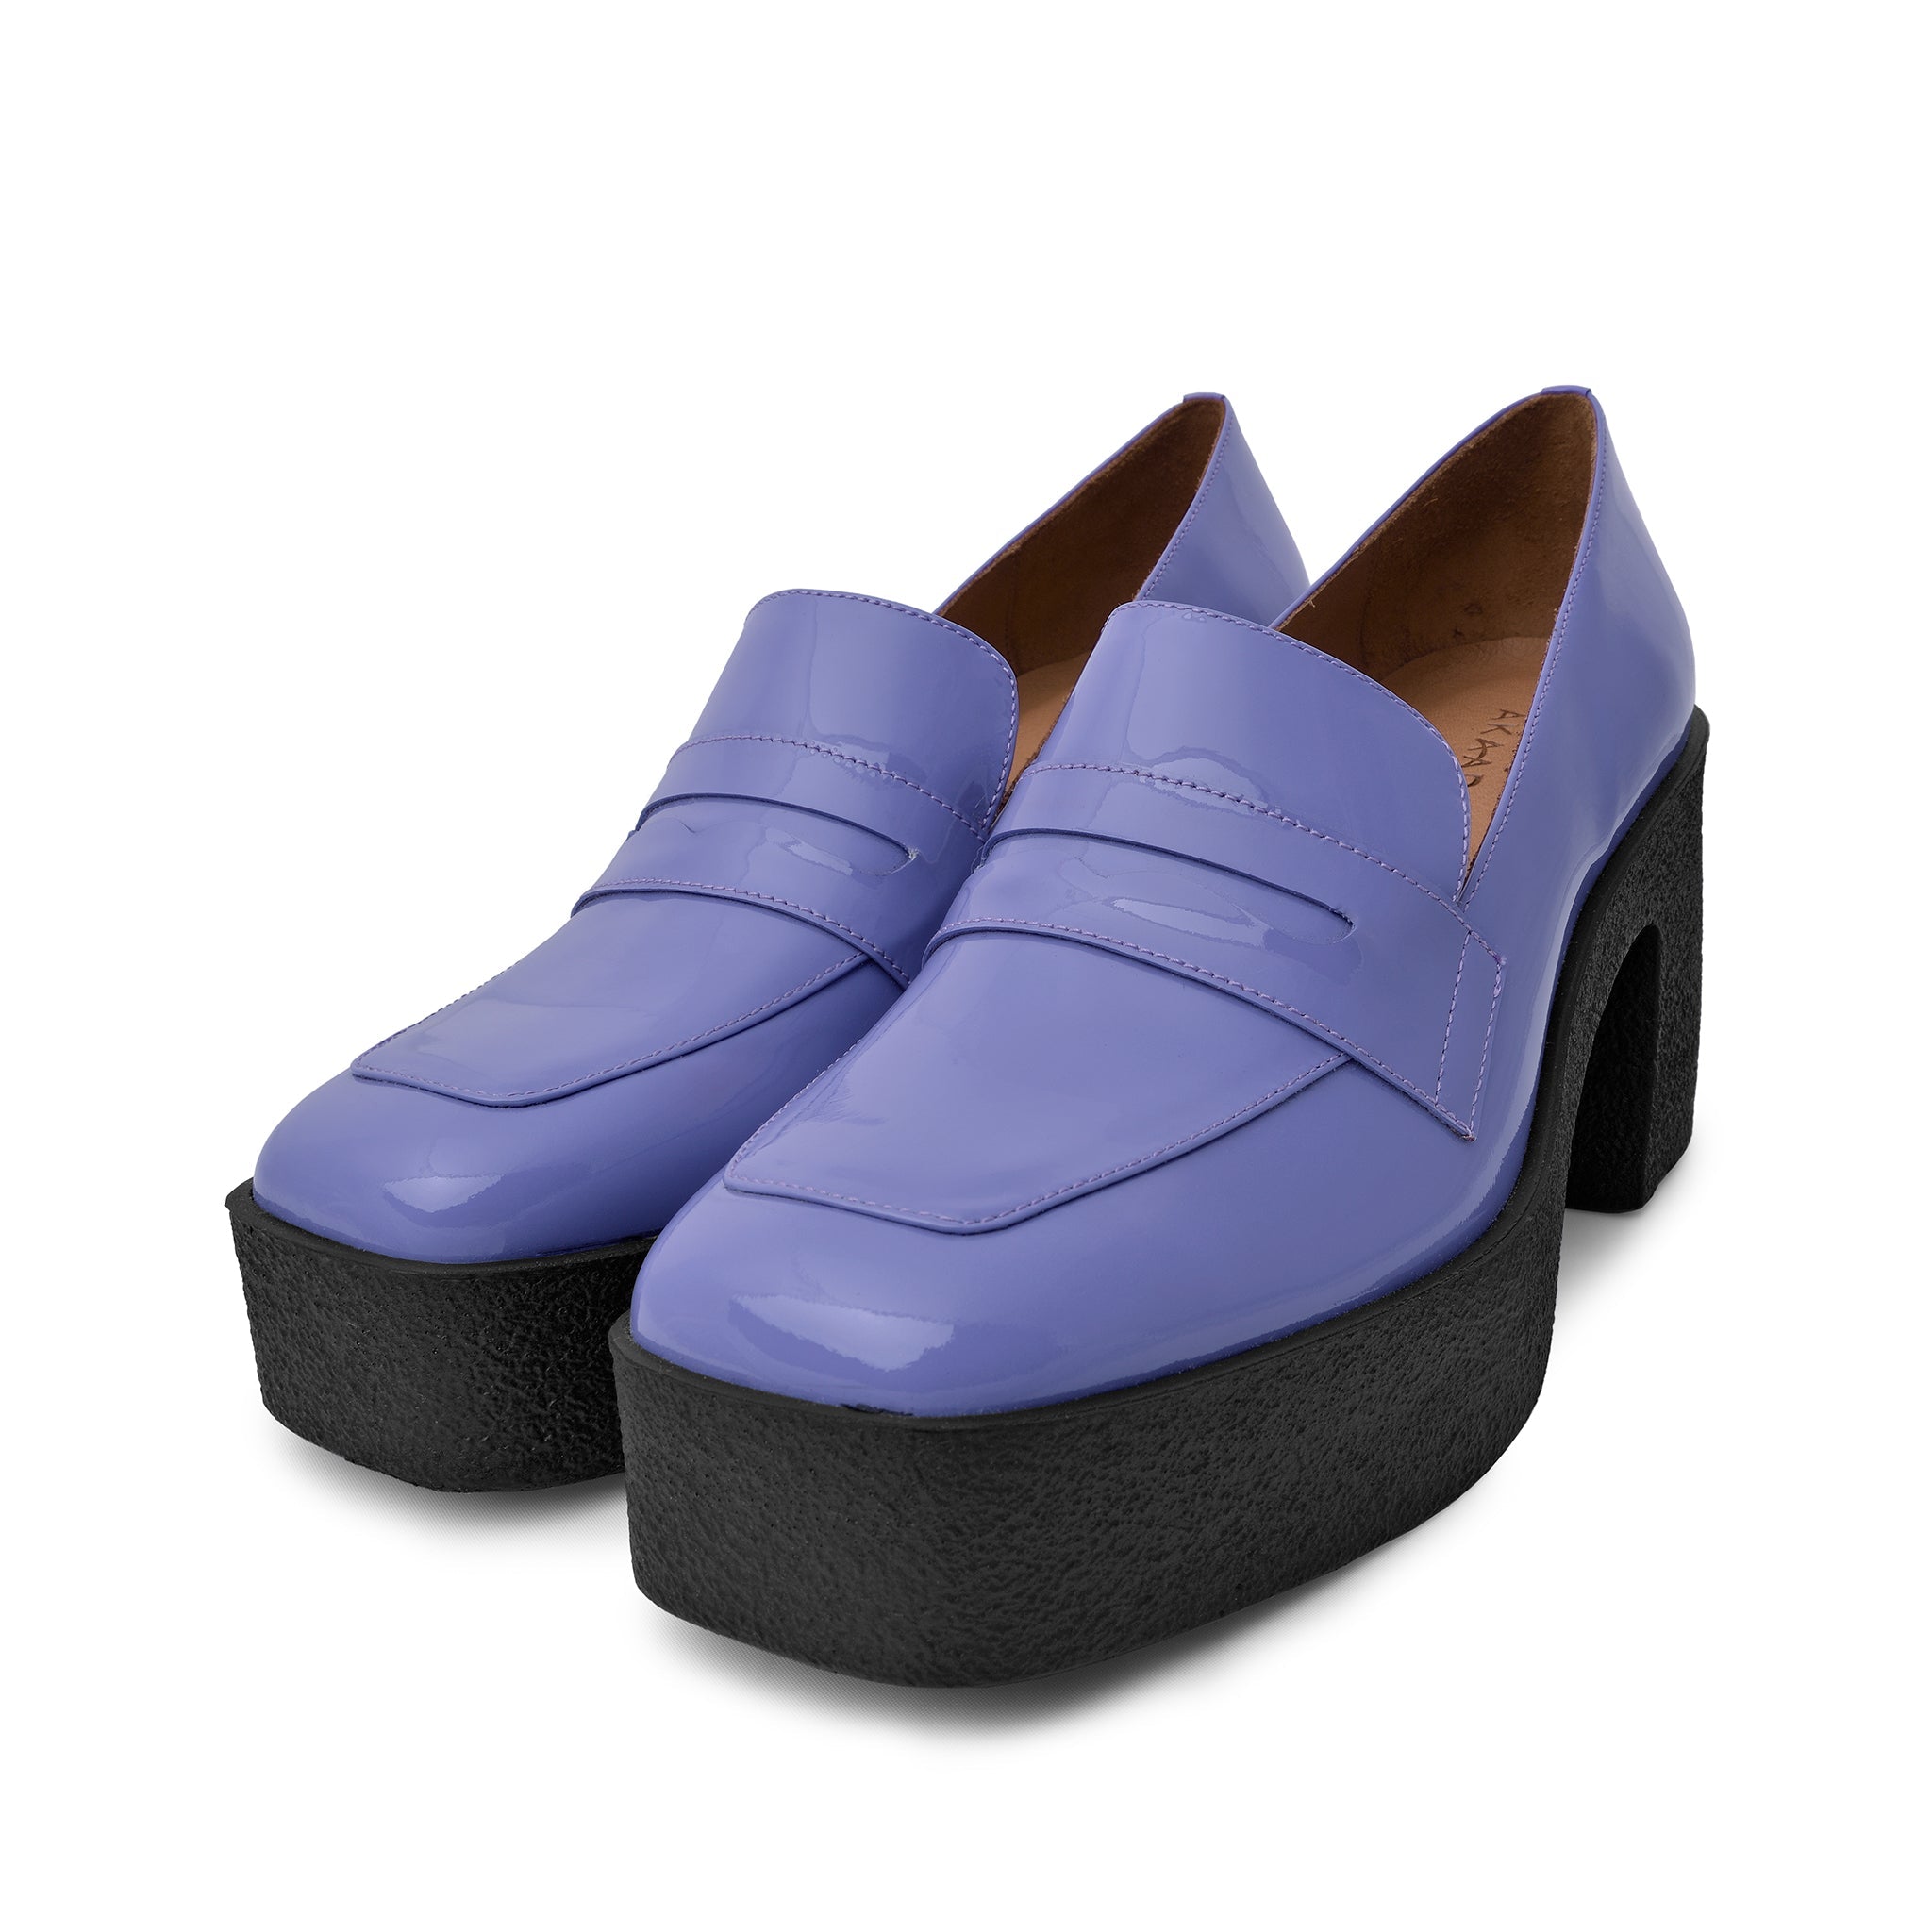 Yoko Lilac Patent Leather Chunky Loafers 21031-01-04 -10